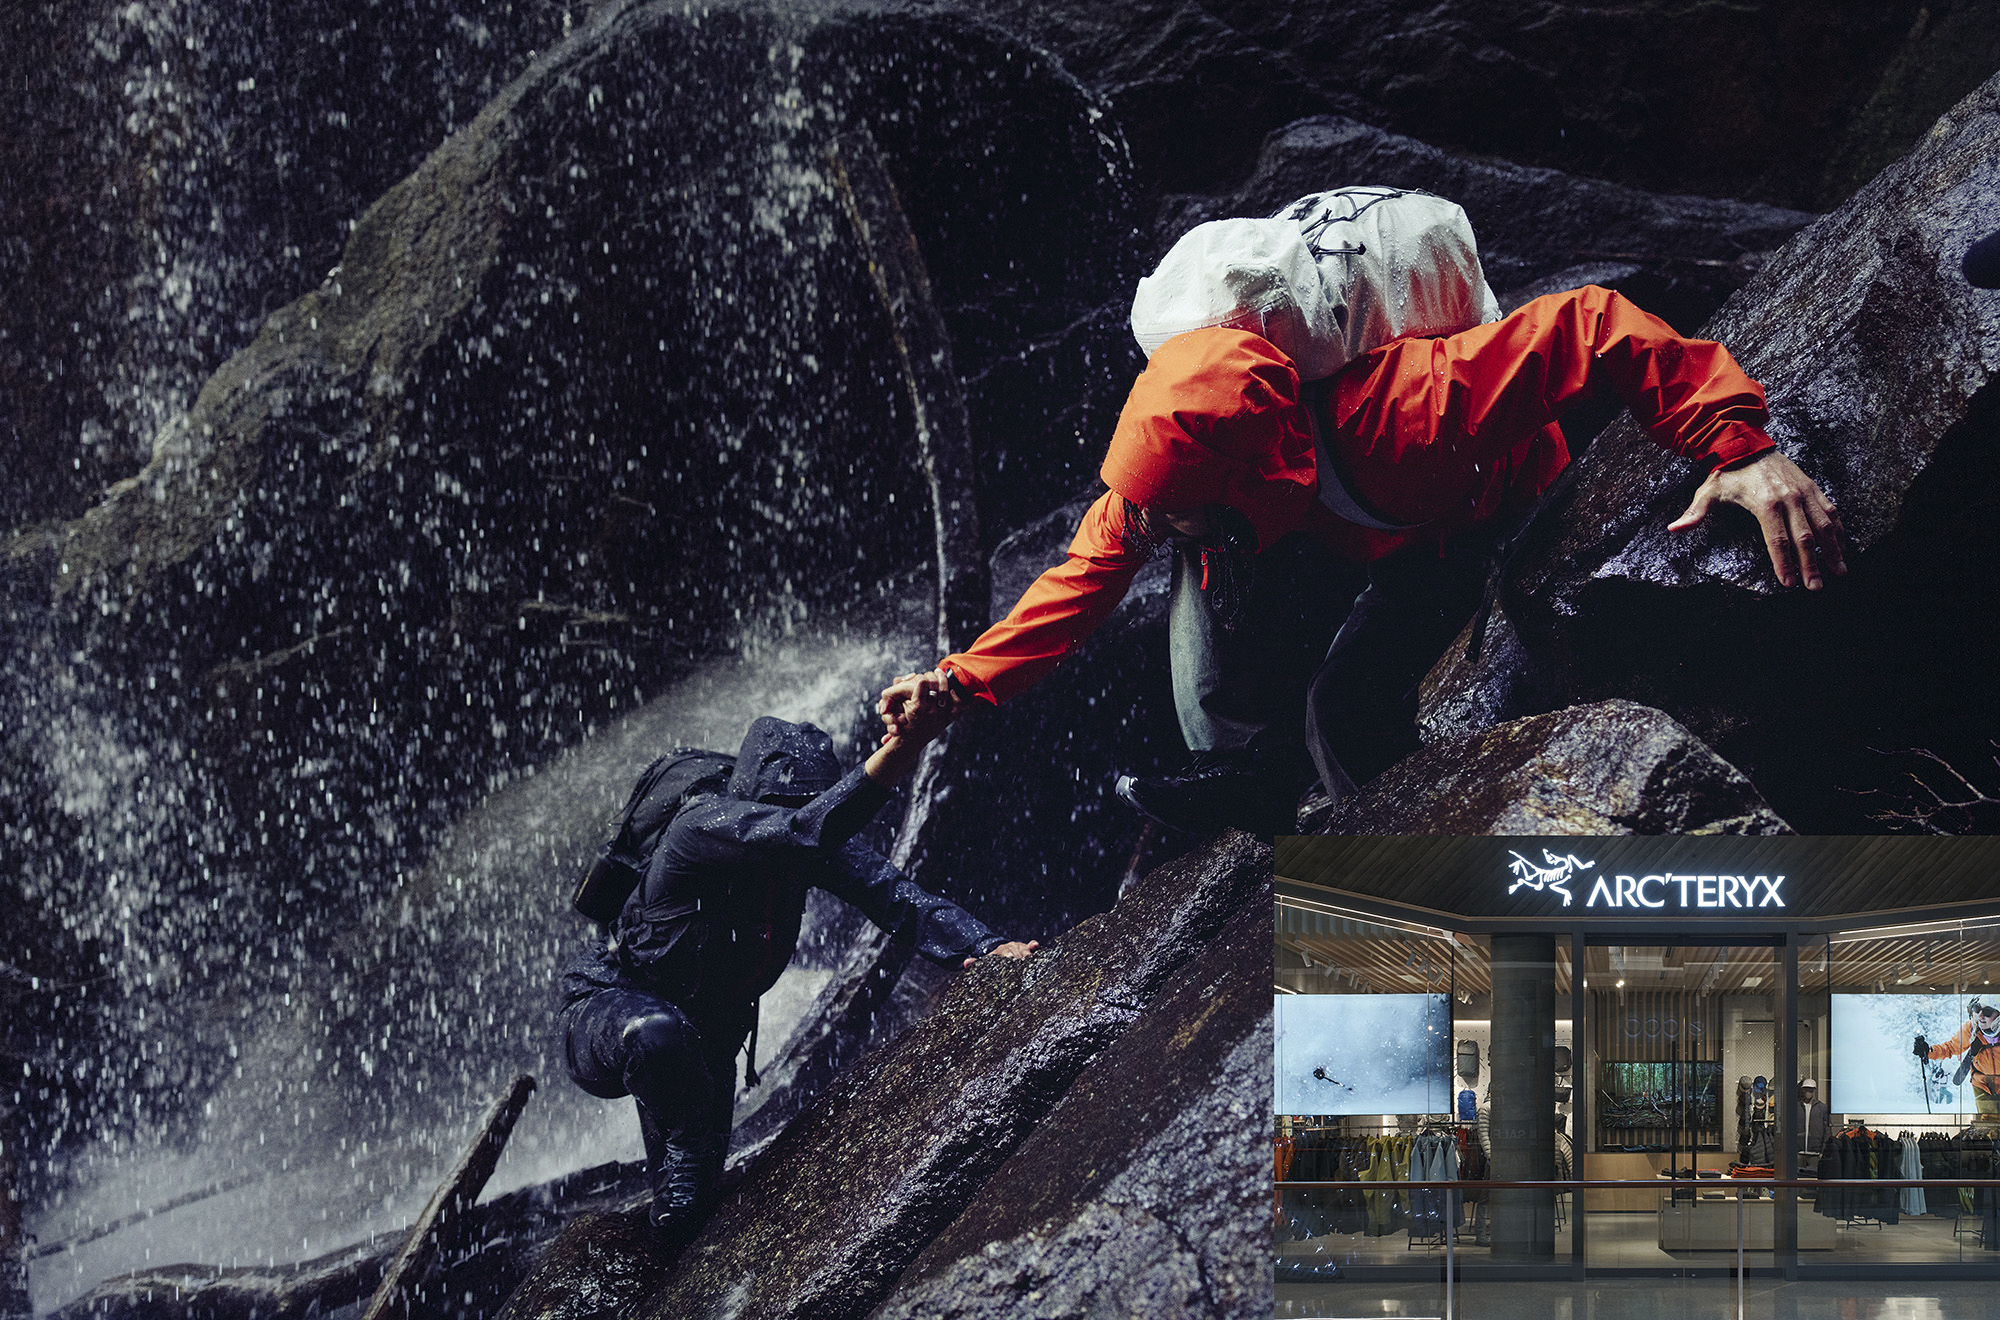 The history and success of Arc'teryx